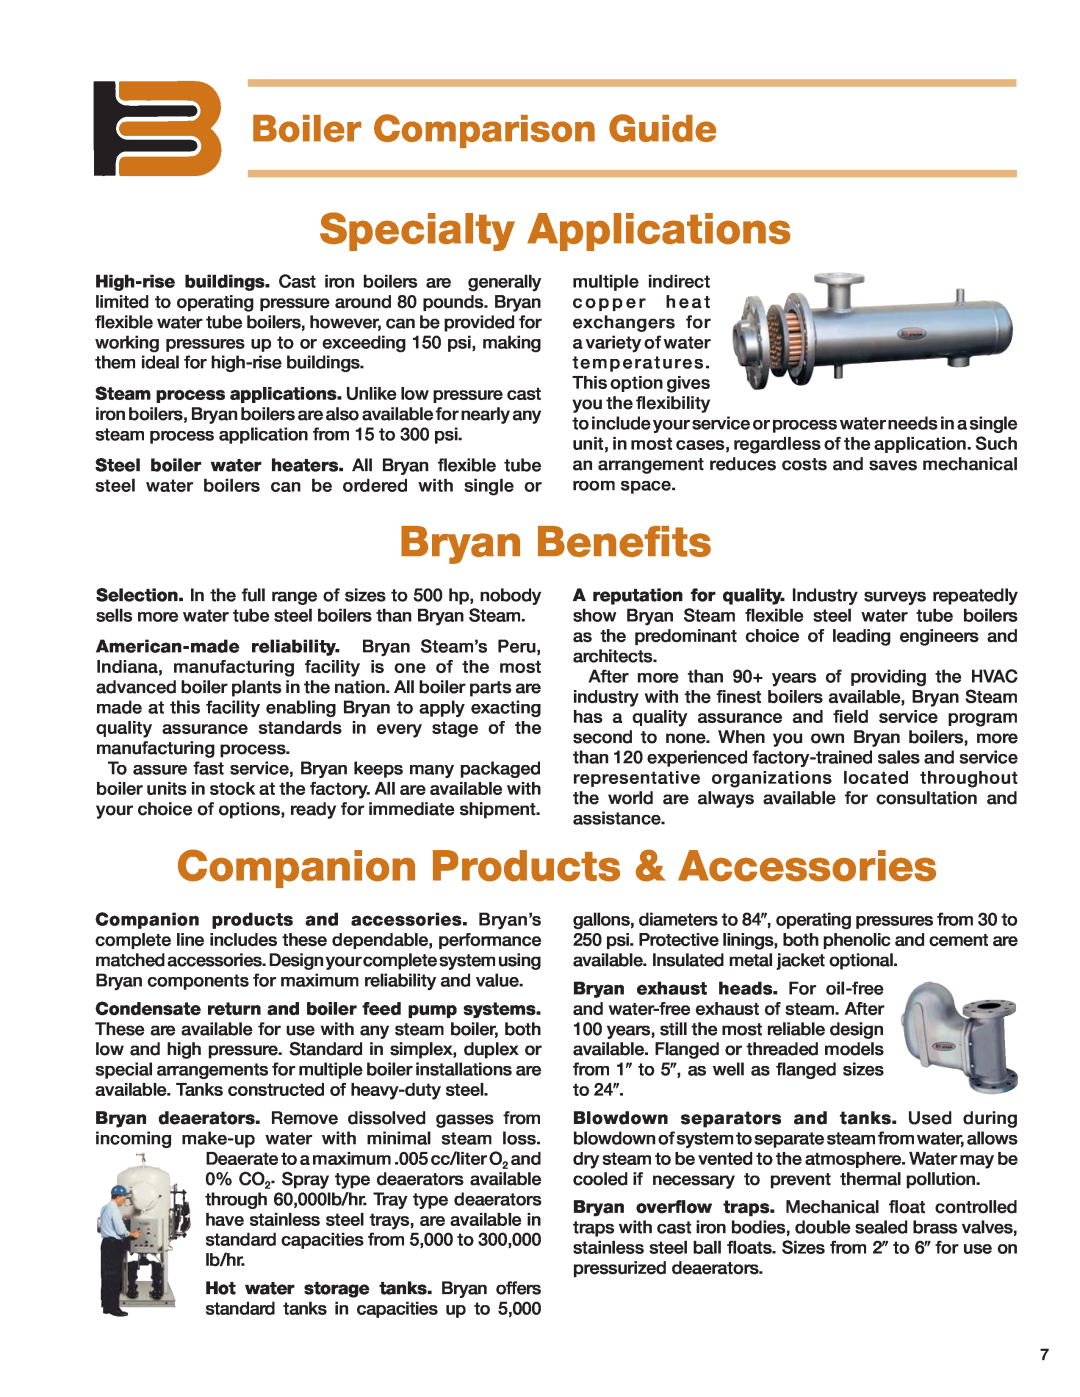 Bryan Boilers Tube Steel Boilers manual Specialty Applications, Bryan Beneﬁts, Companion Products & Accessories 